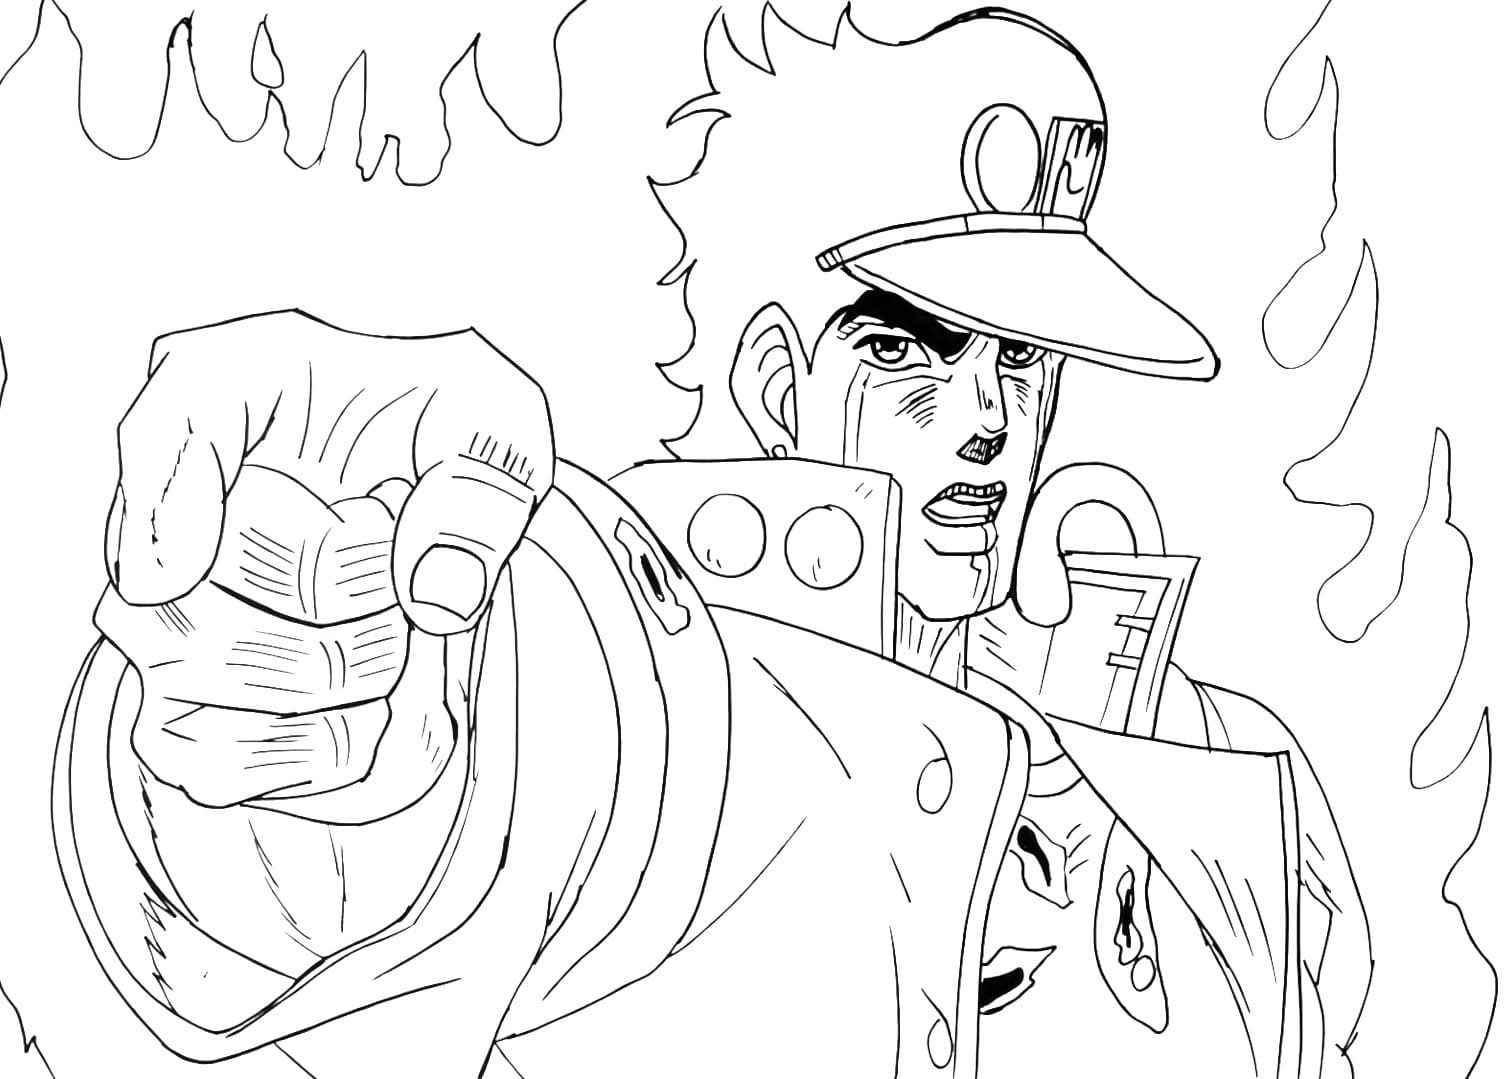 Jotaro coloring pages